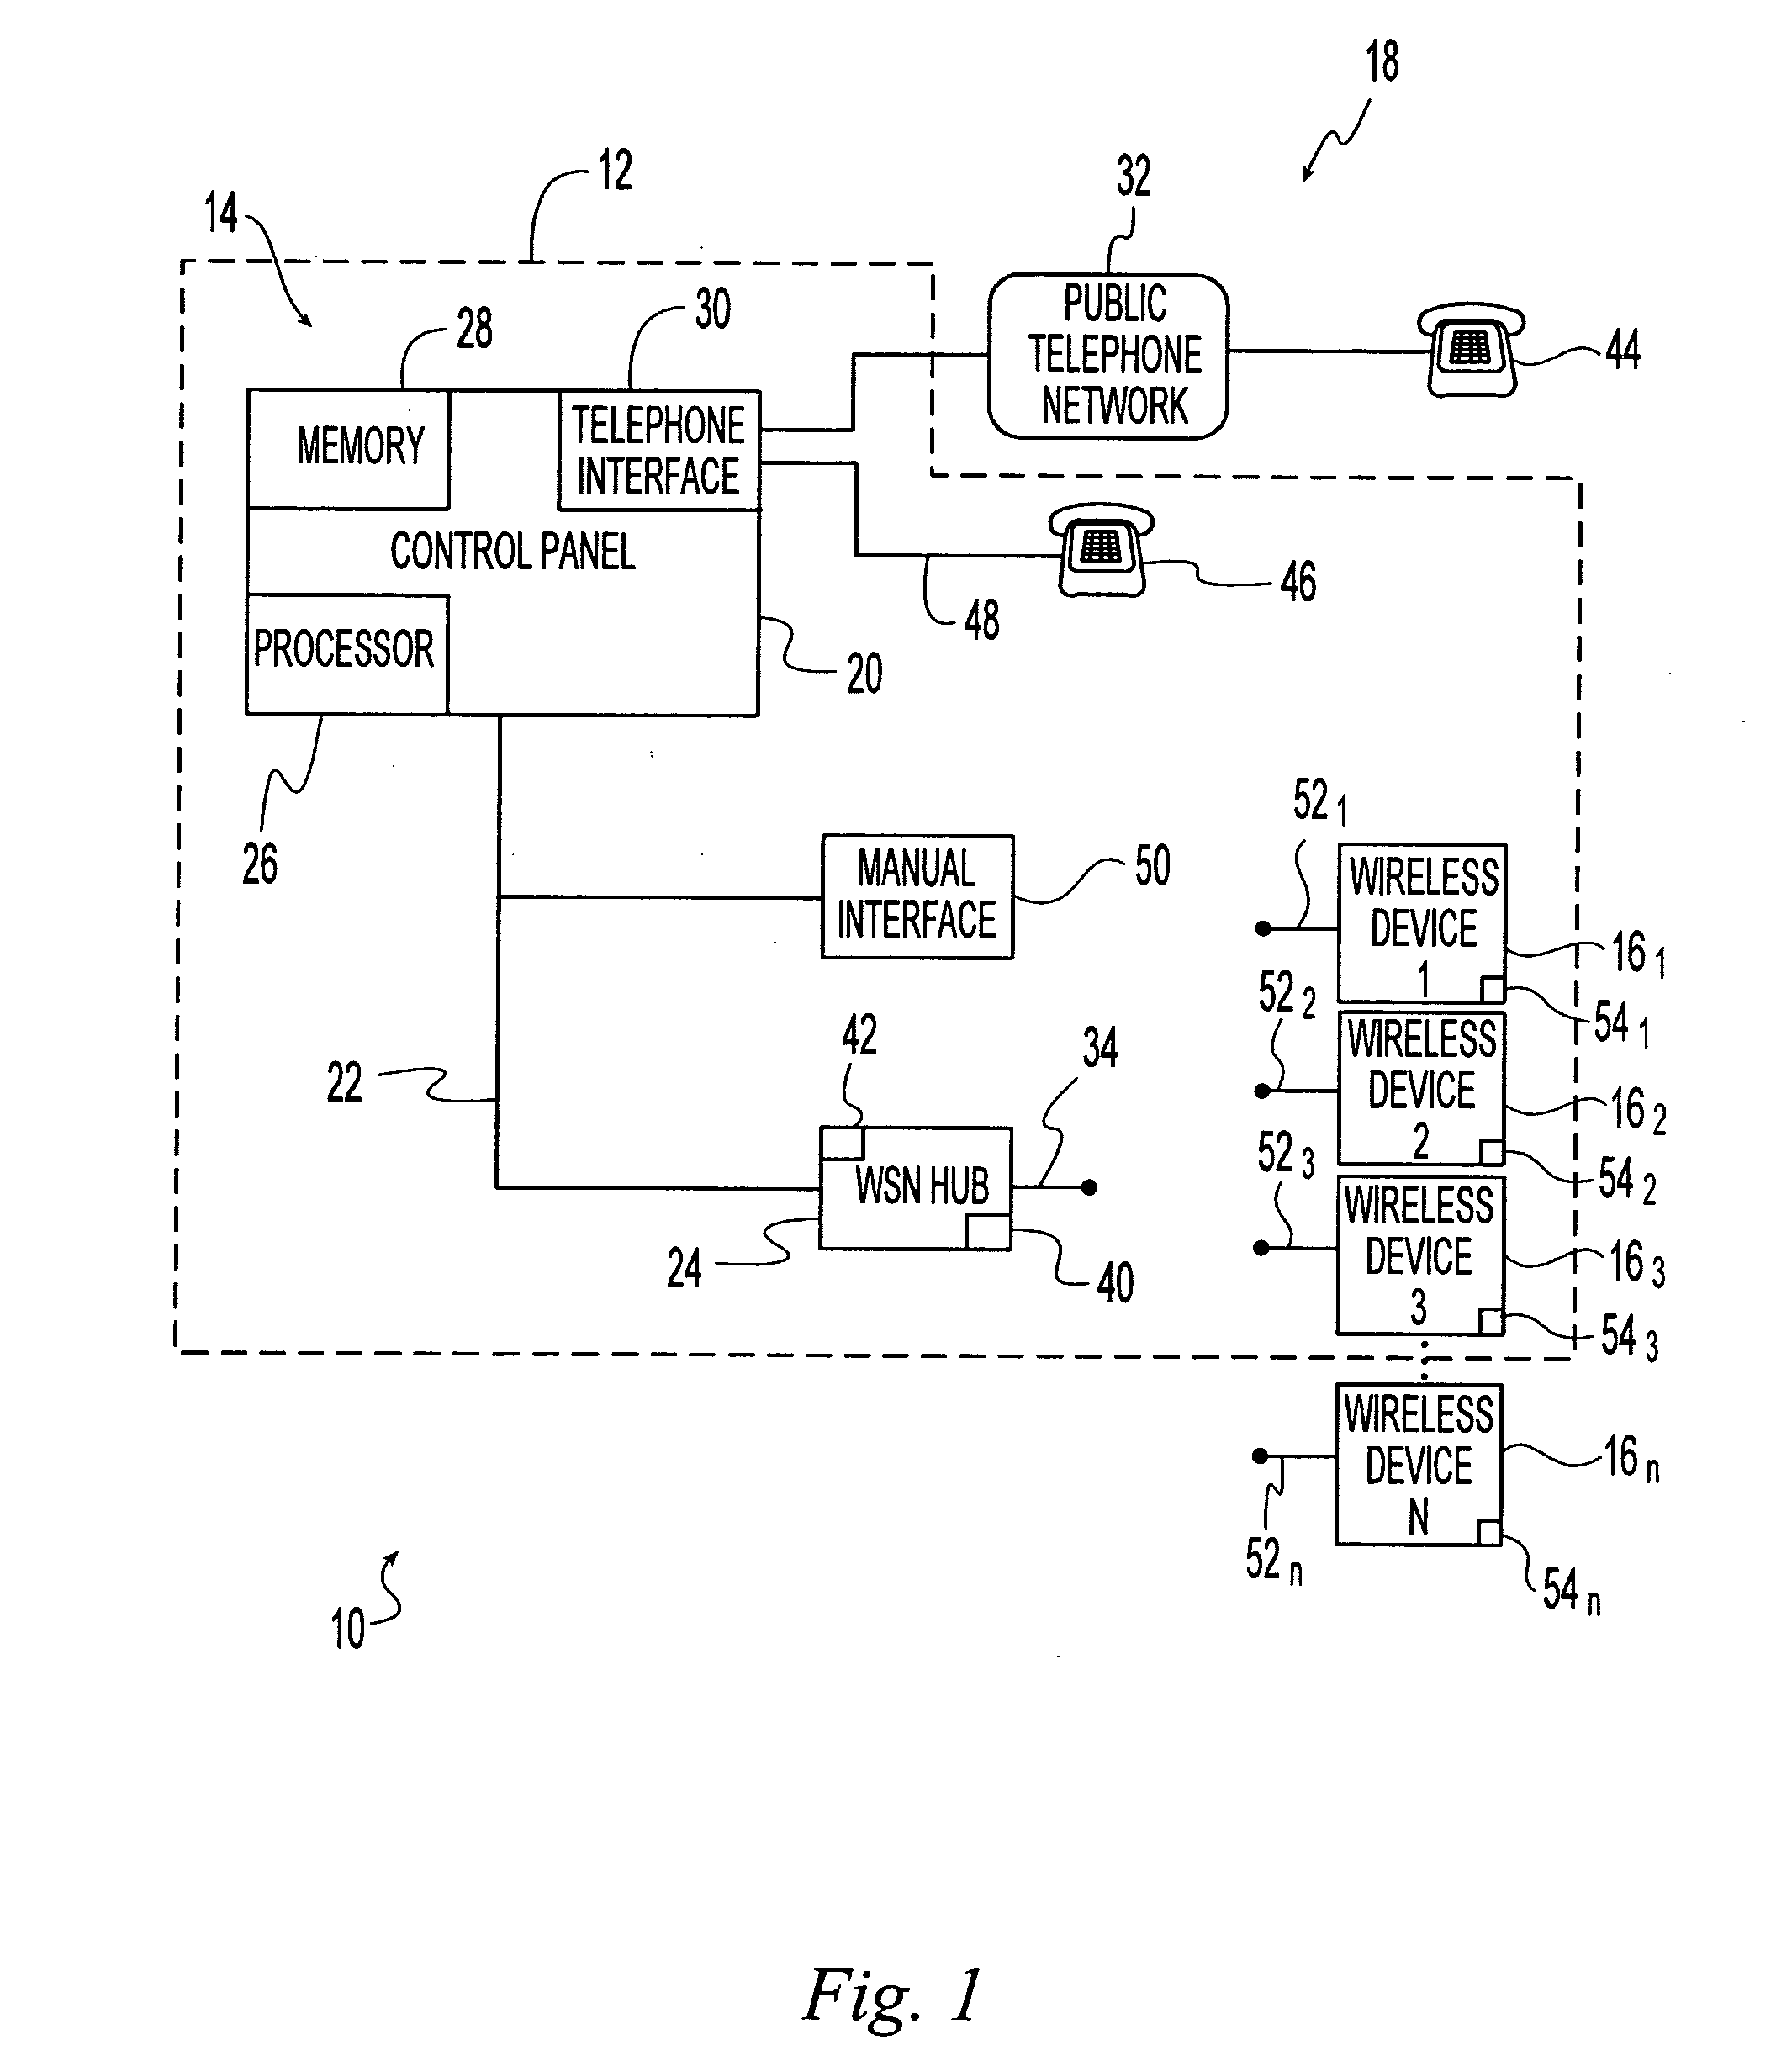 Method and apparatus for installing a wireless security system